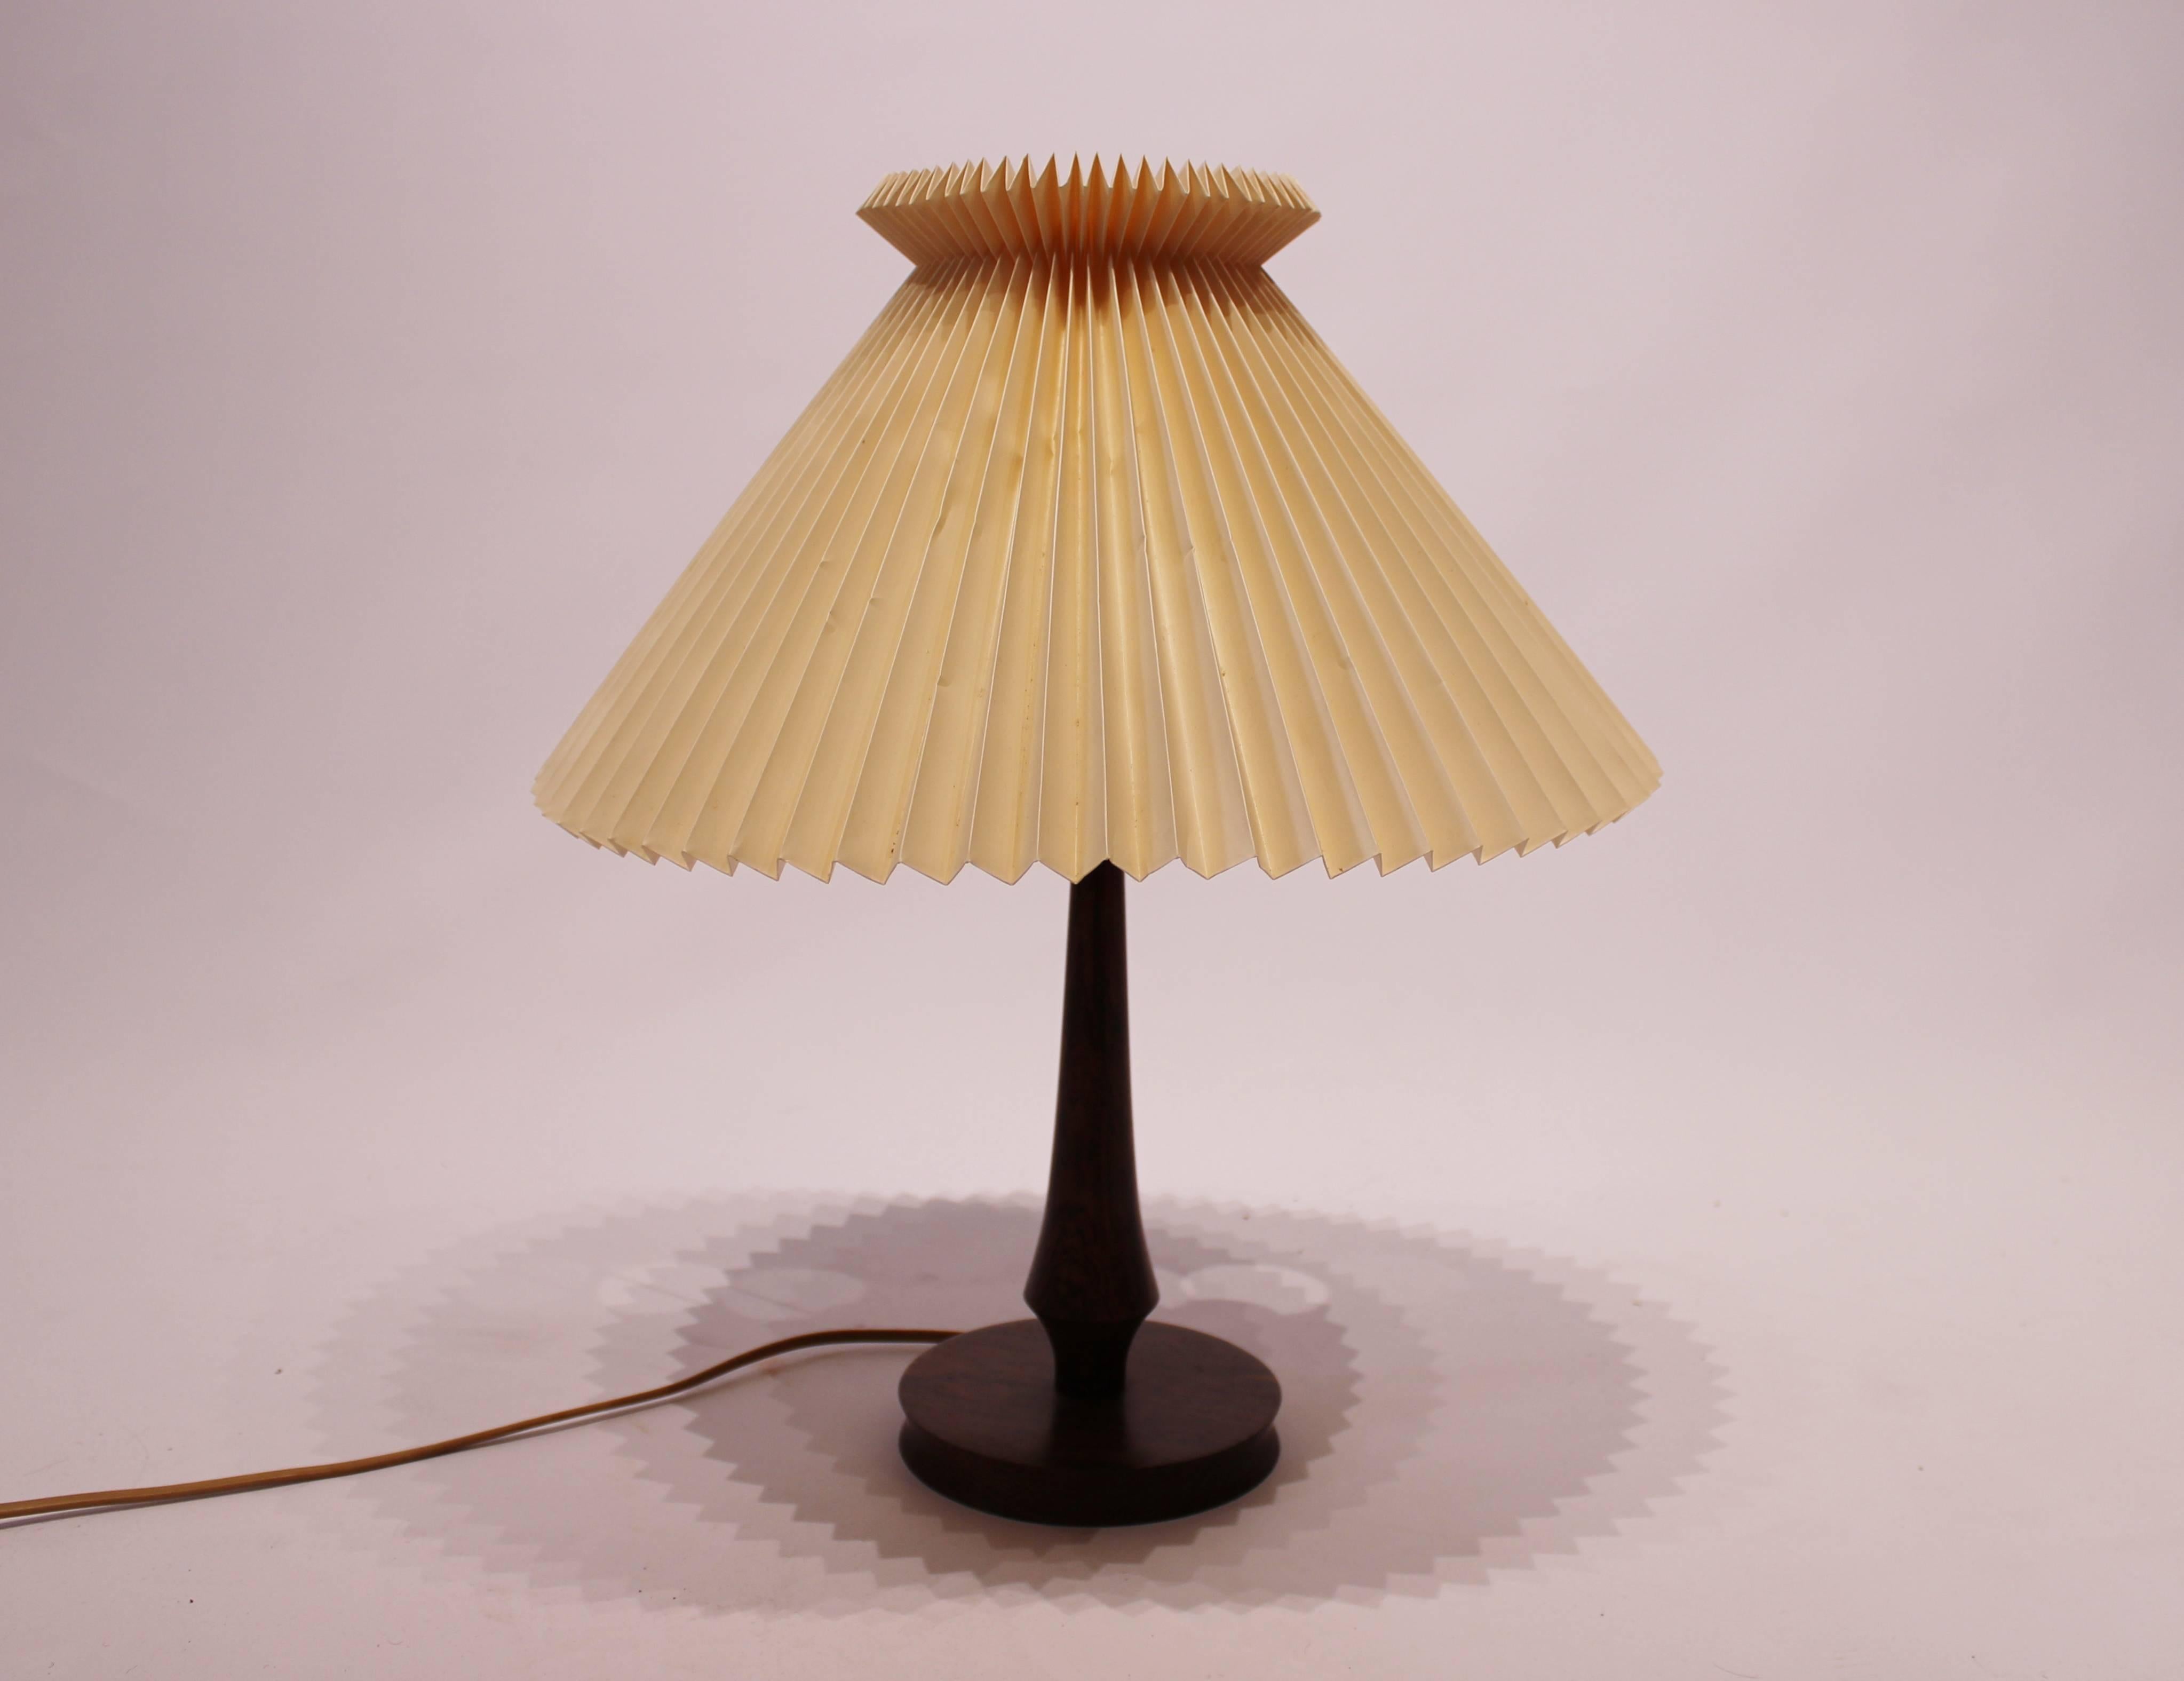 Table lamp in rosewood with Le Klint shade and of Danish design from the 1960s. The lamp is in great vintage condition.